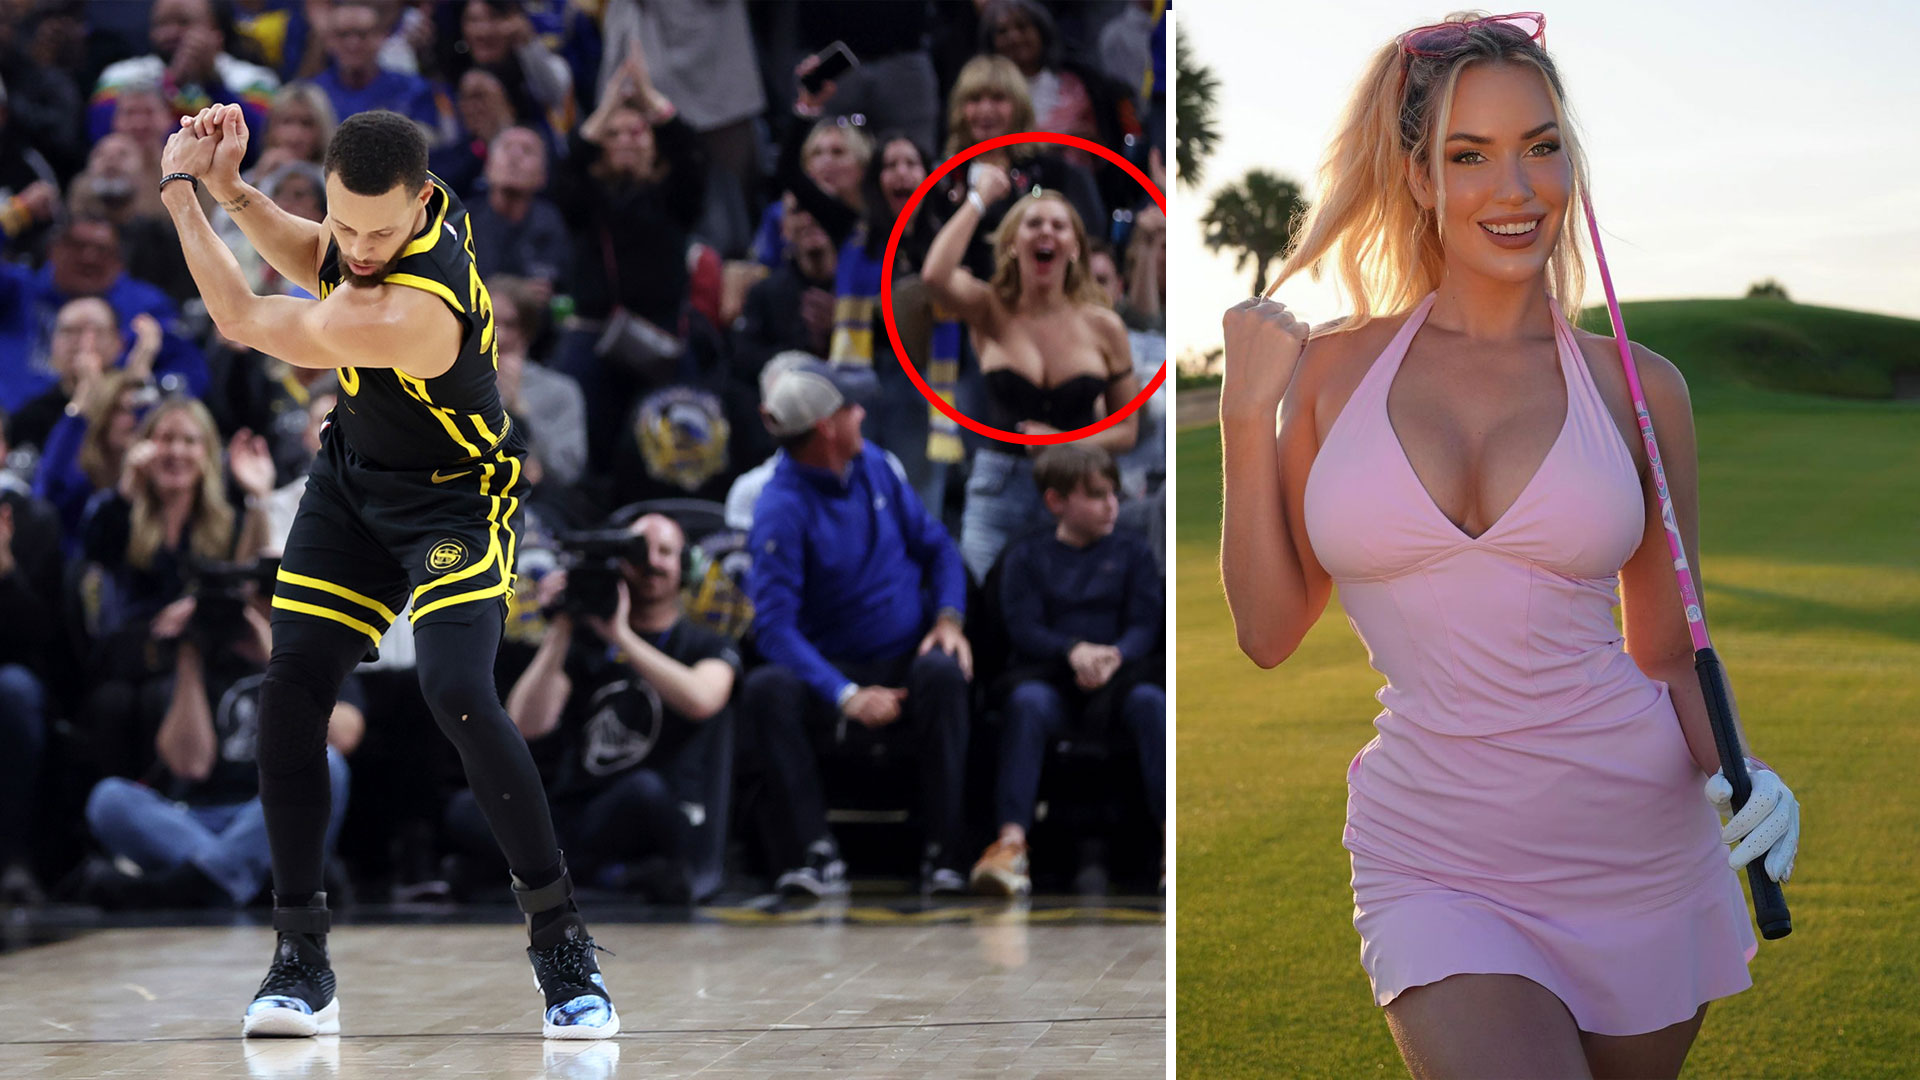 Paige Spiranac forced to deny she suffered wardrobe malfunction after fans mistake her for viral big-boobed woman at NBA